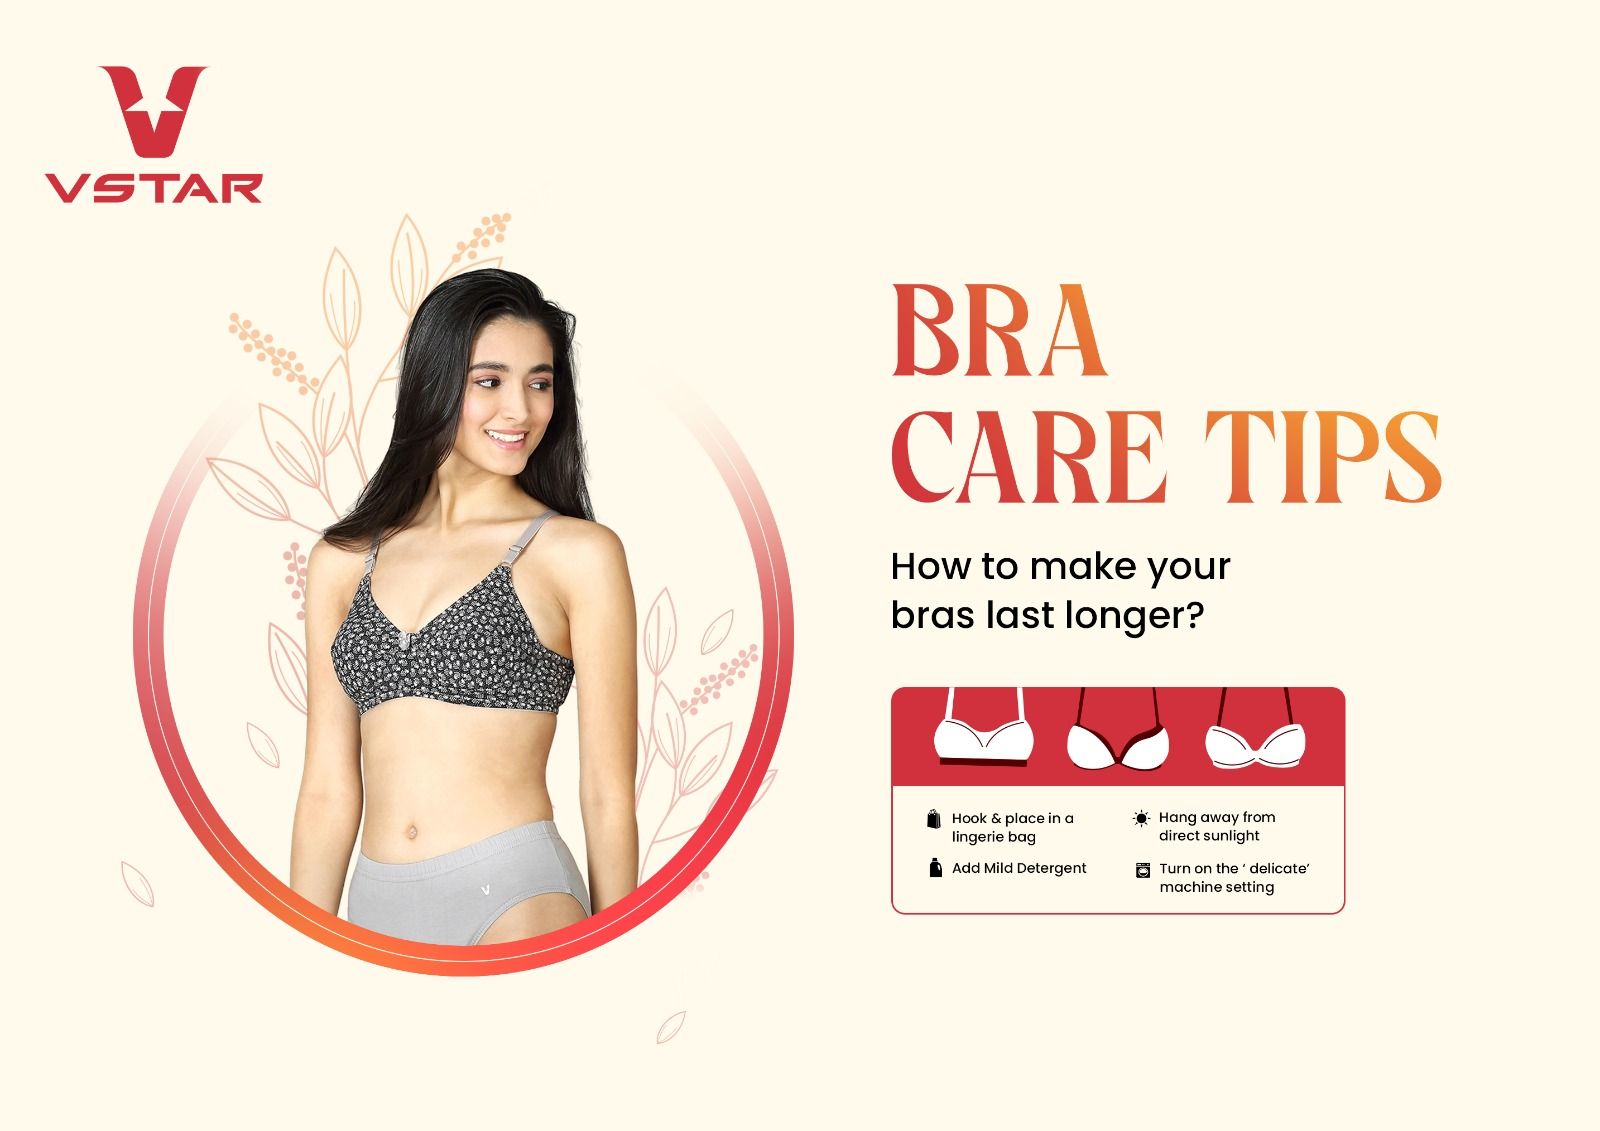 Disadvantages of Wearing Bra: 4 Ways Your Bra is SERIOUSLY Damaging your  Health!